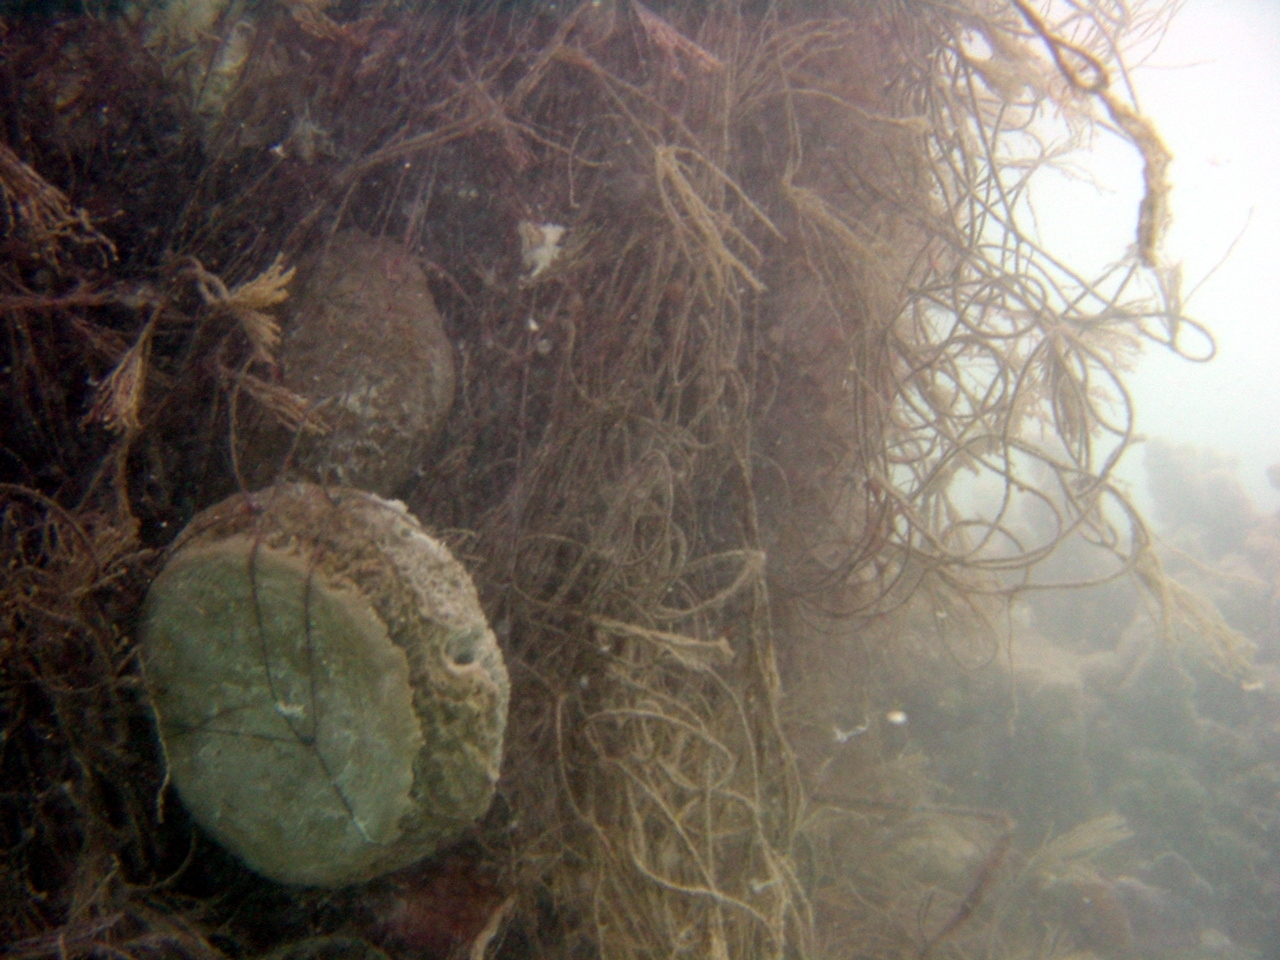 Whale vertebrae wrapped up in derelict net